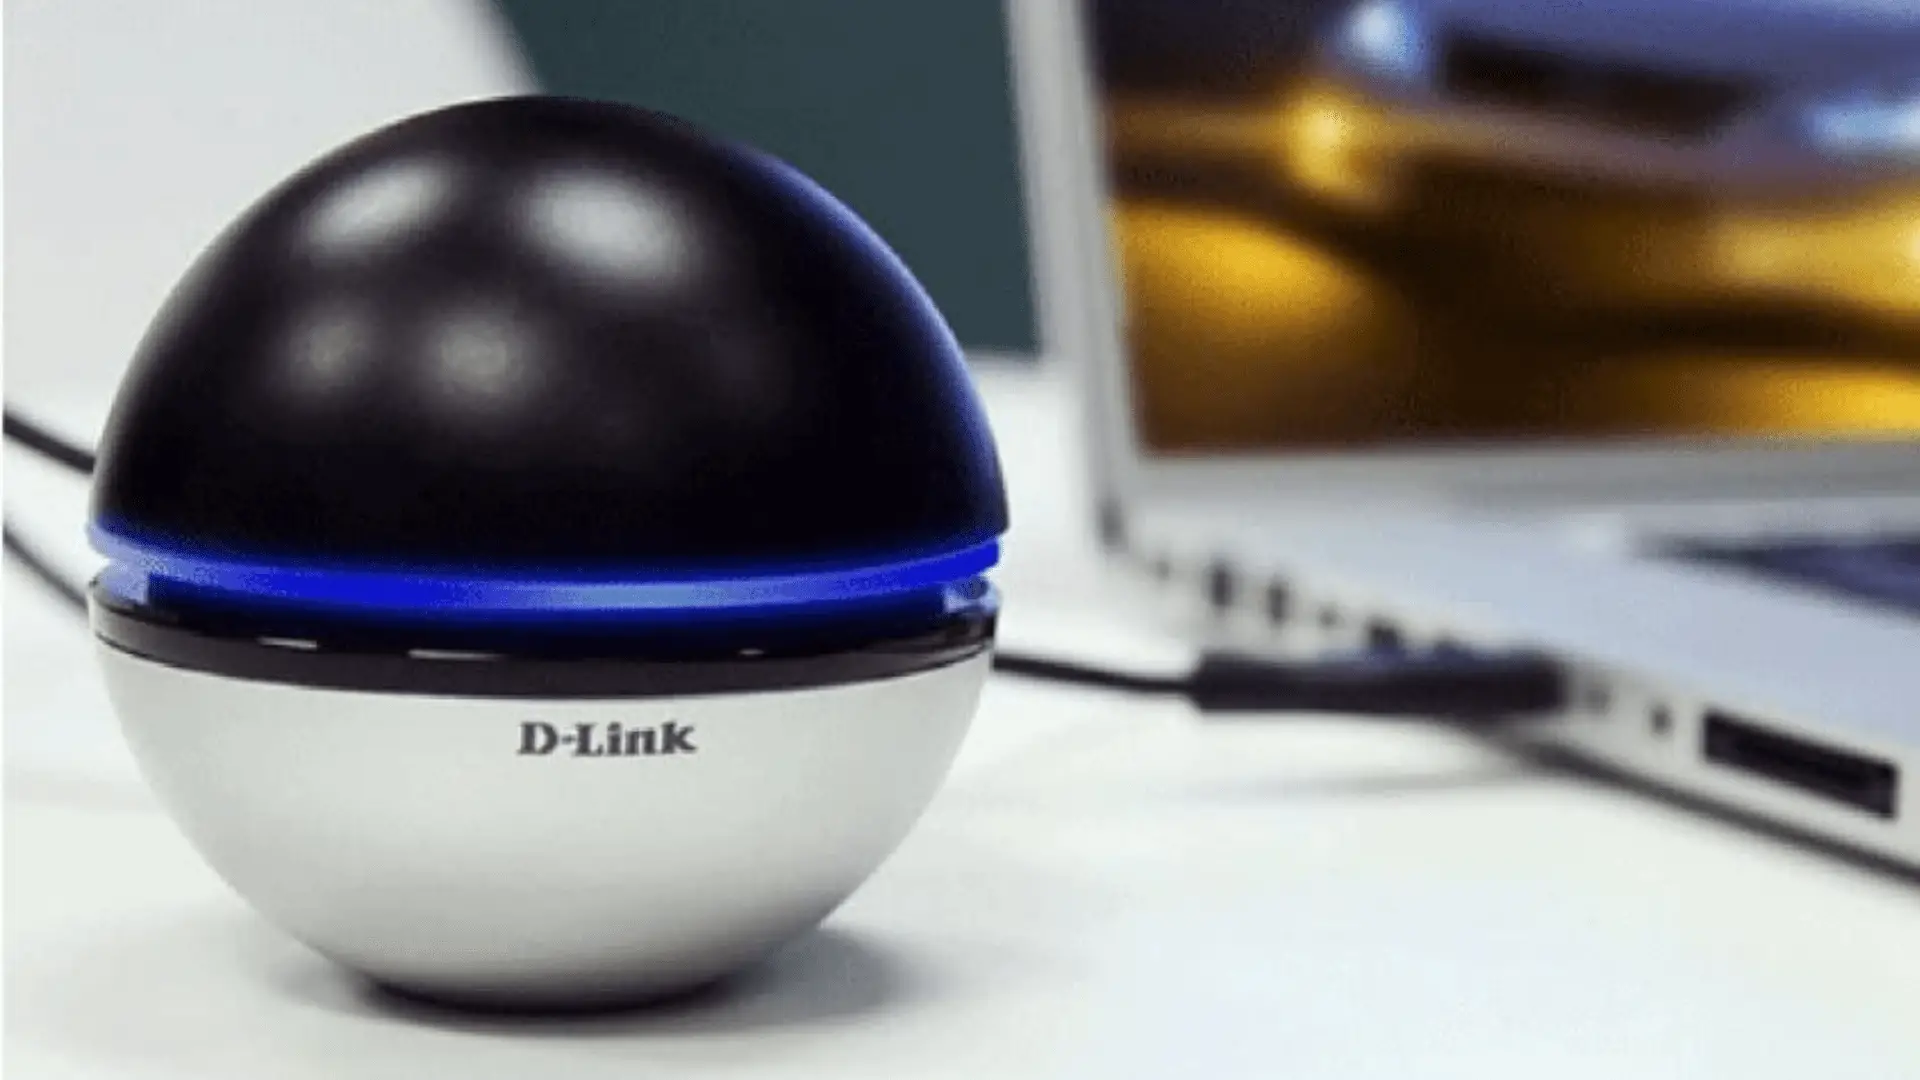 D-Link DWA-192 wireless adapter connected to a Macbook